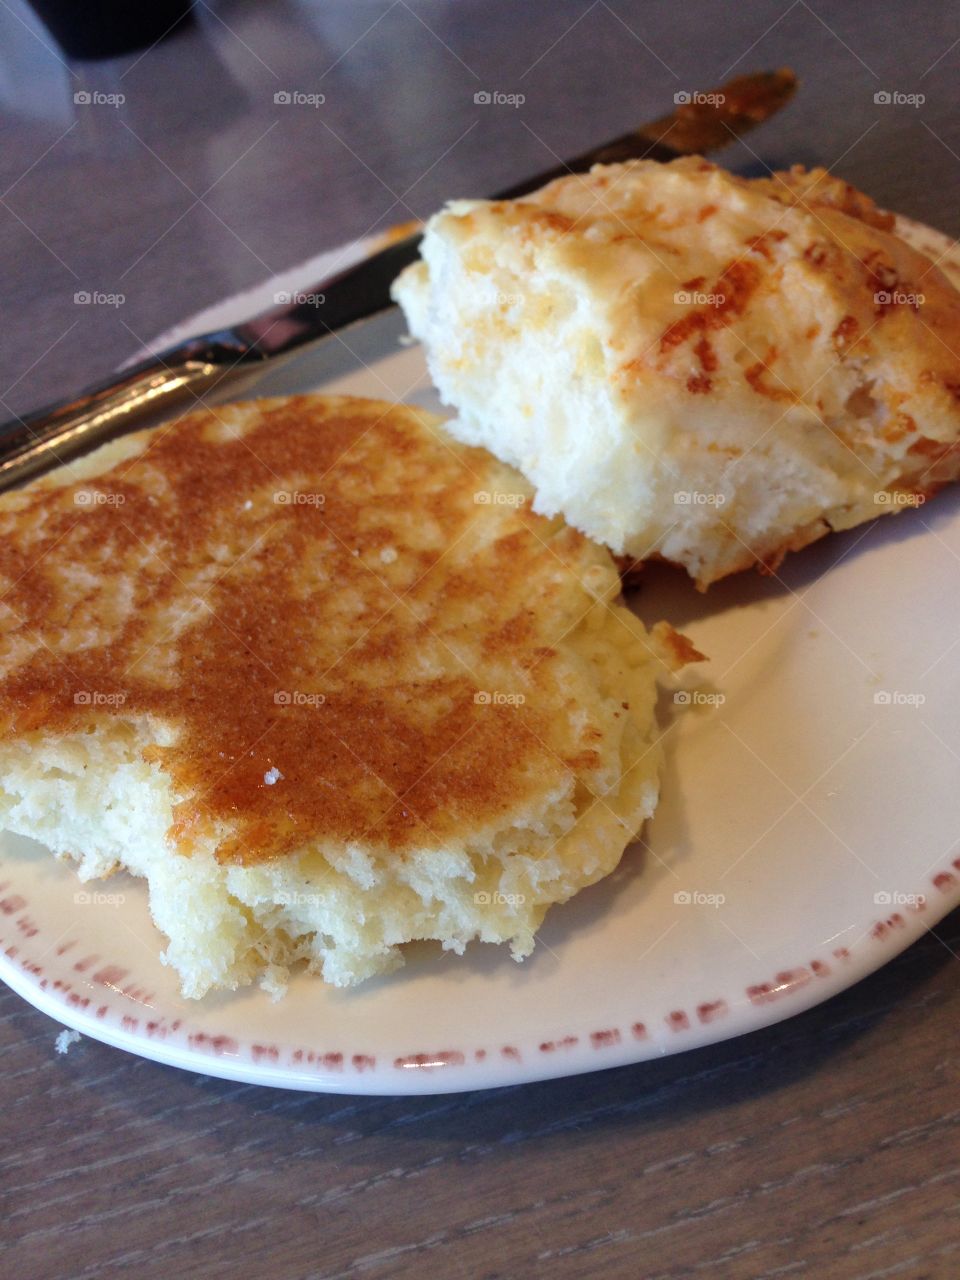 Cornbread and biscuits 